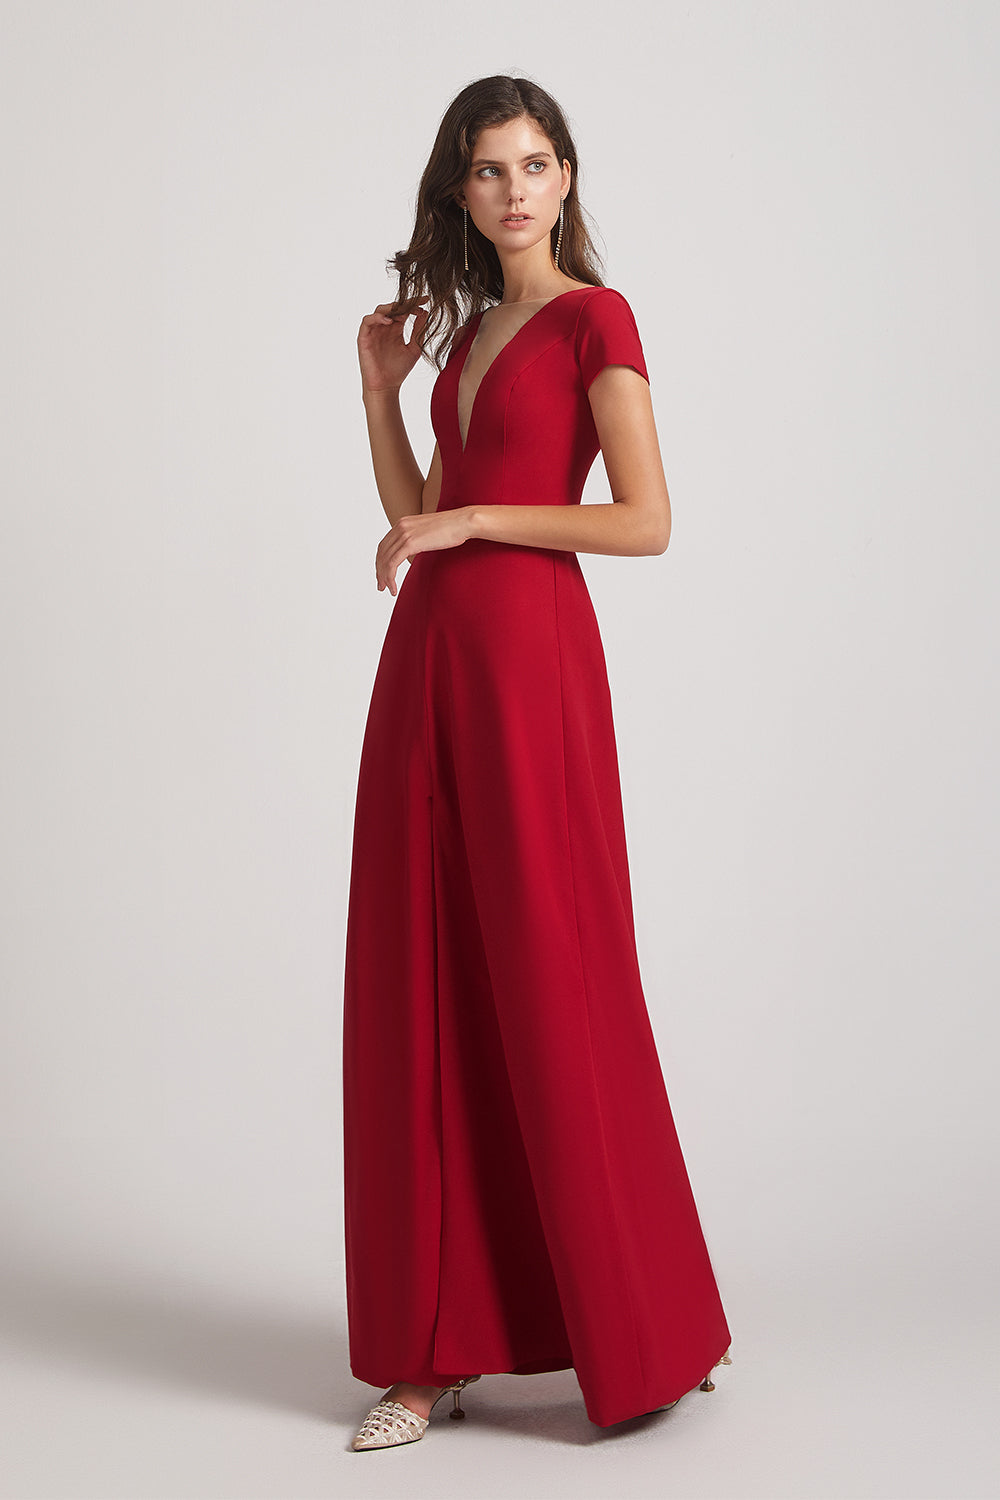 flowy red satin bridesmaids gowns